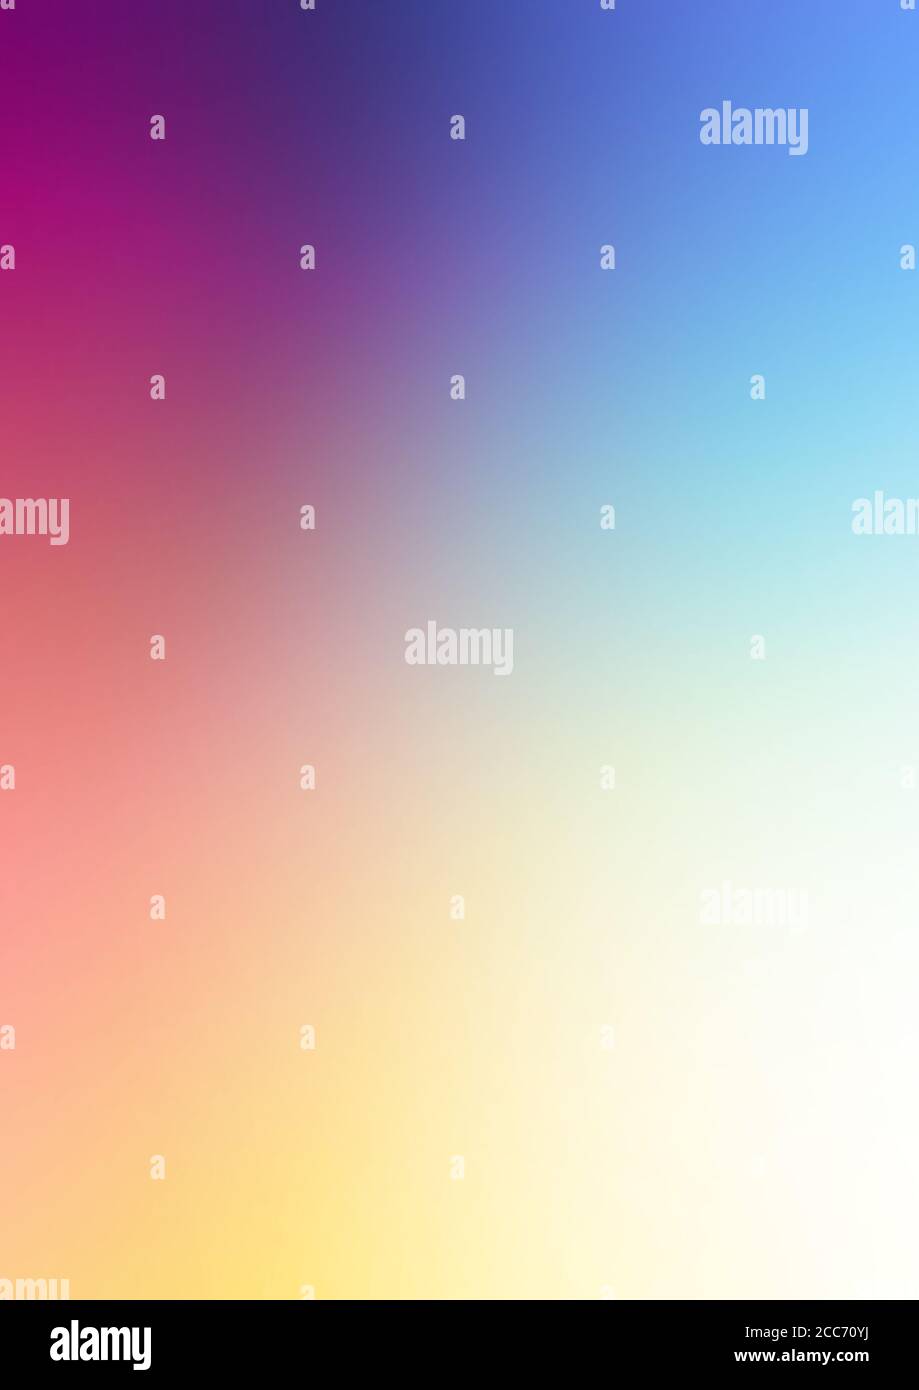 Bright colorful abstract blurry defocussed background Stock Photo